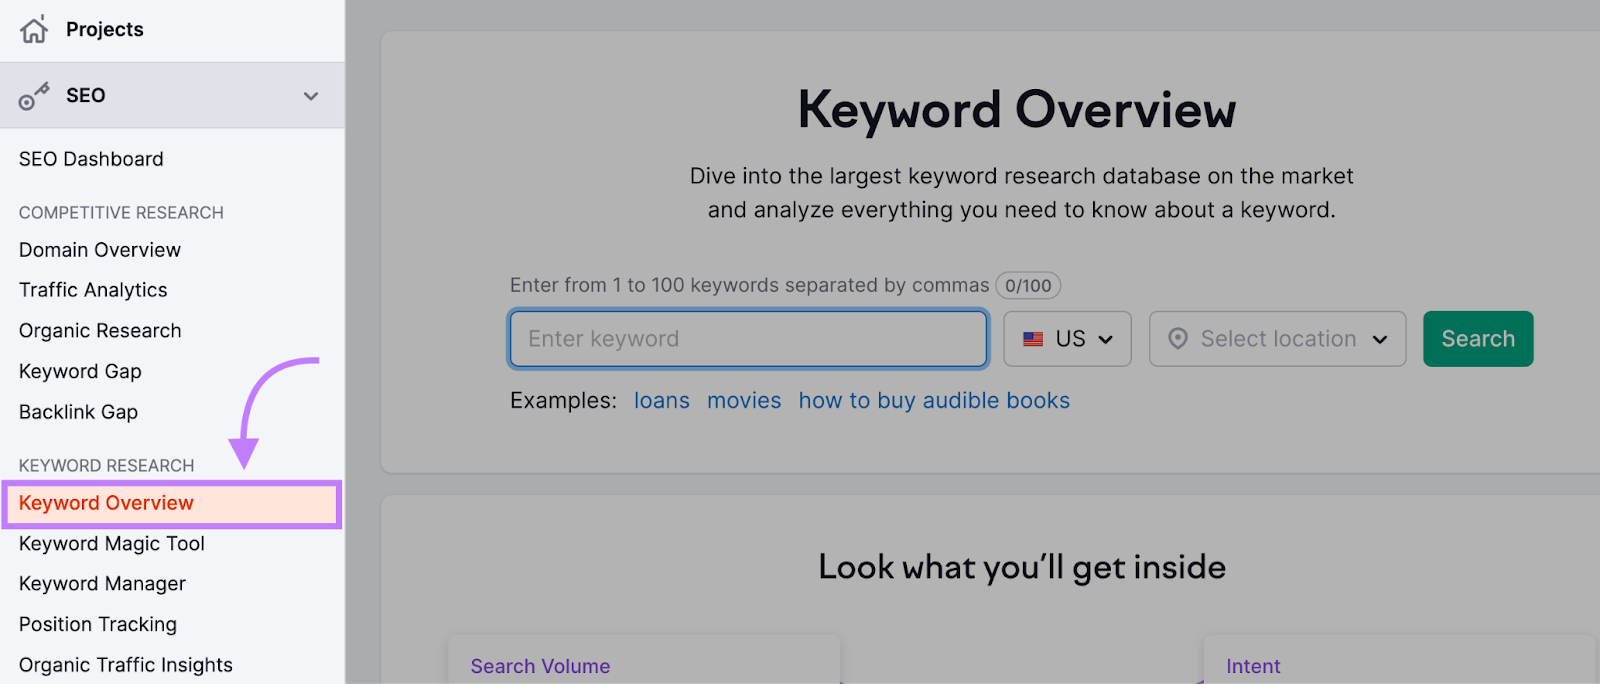 “Keyword Overview” highlighted in menu